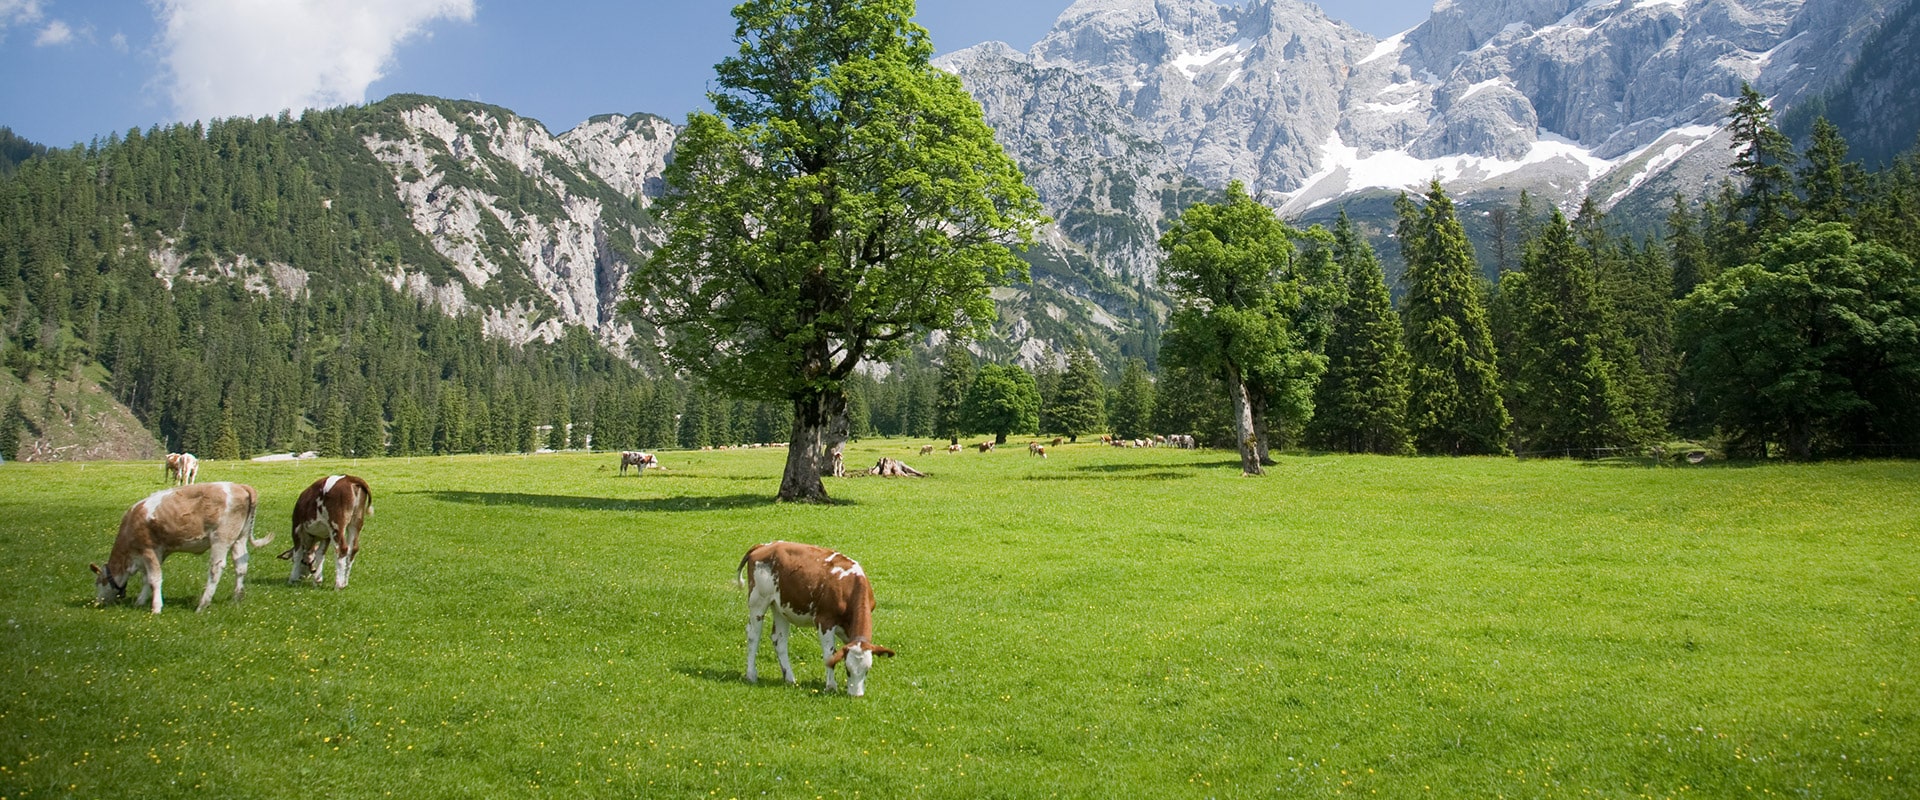 Swiss mountain landcape with cows and trees